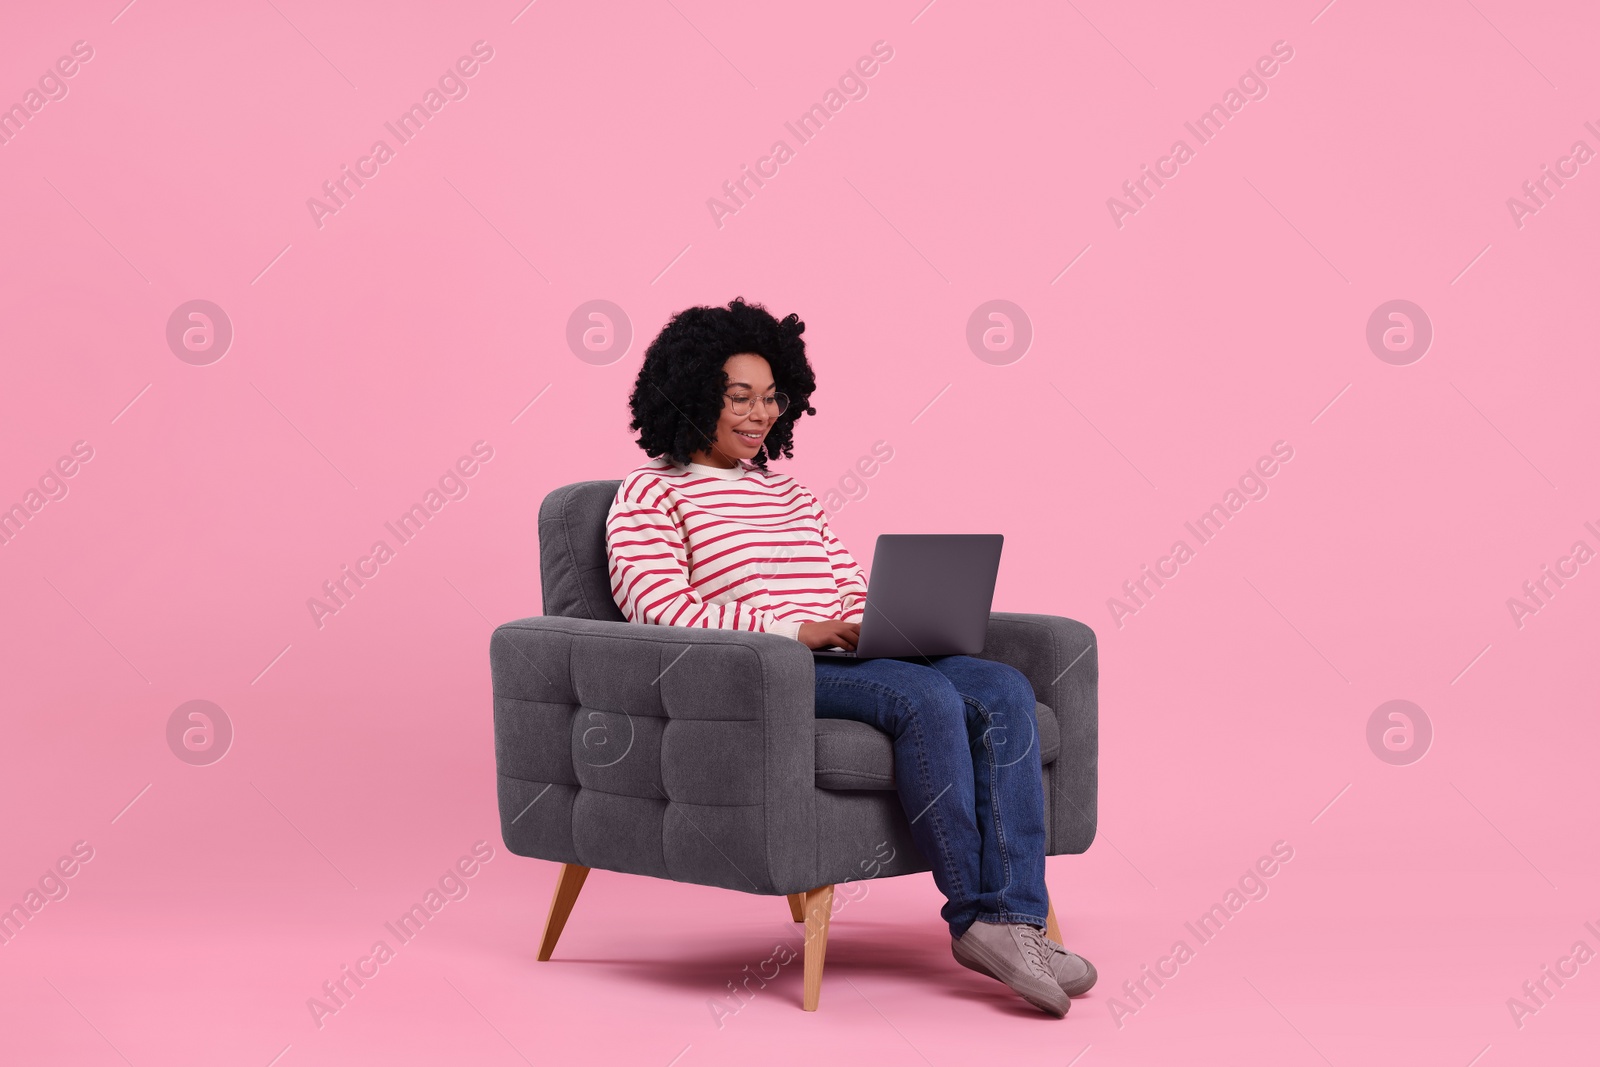 Photo of Happy young woman with laptop sitting in armchair against pink background